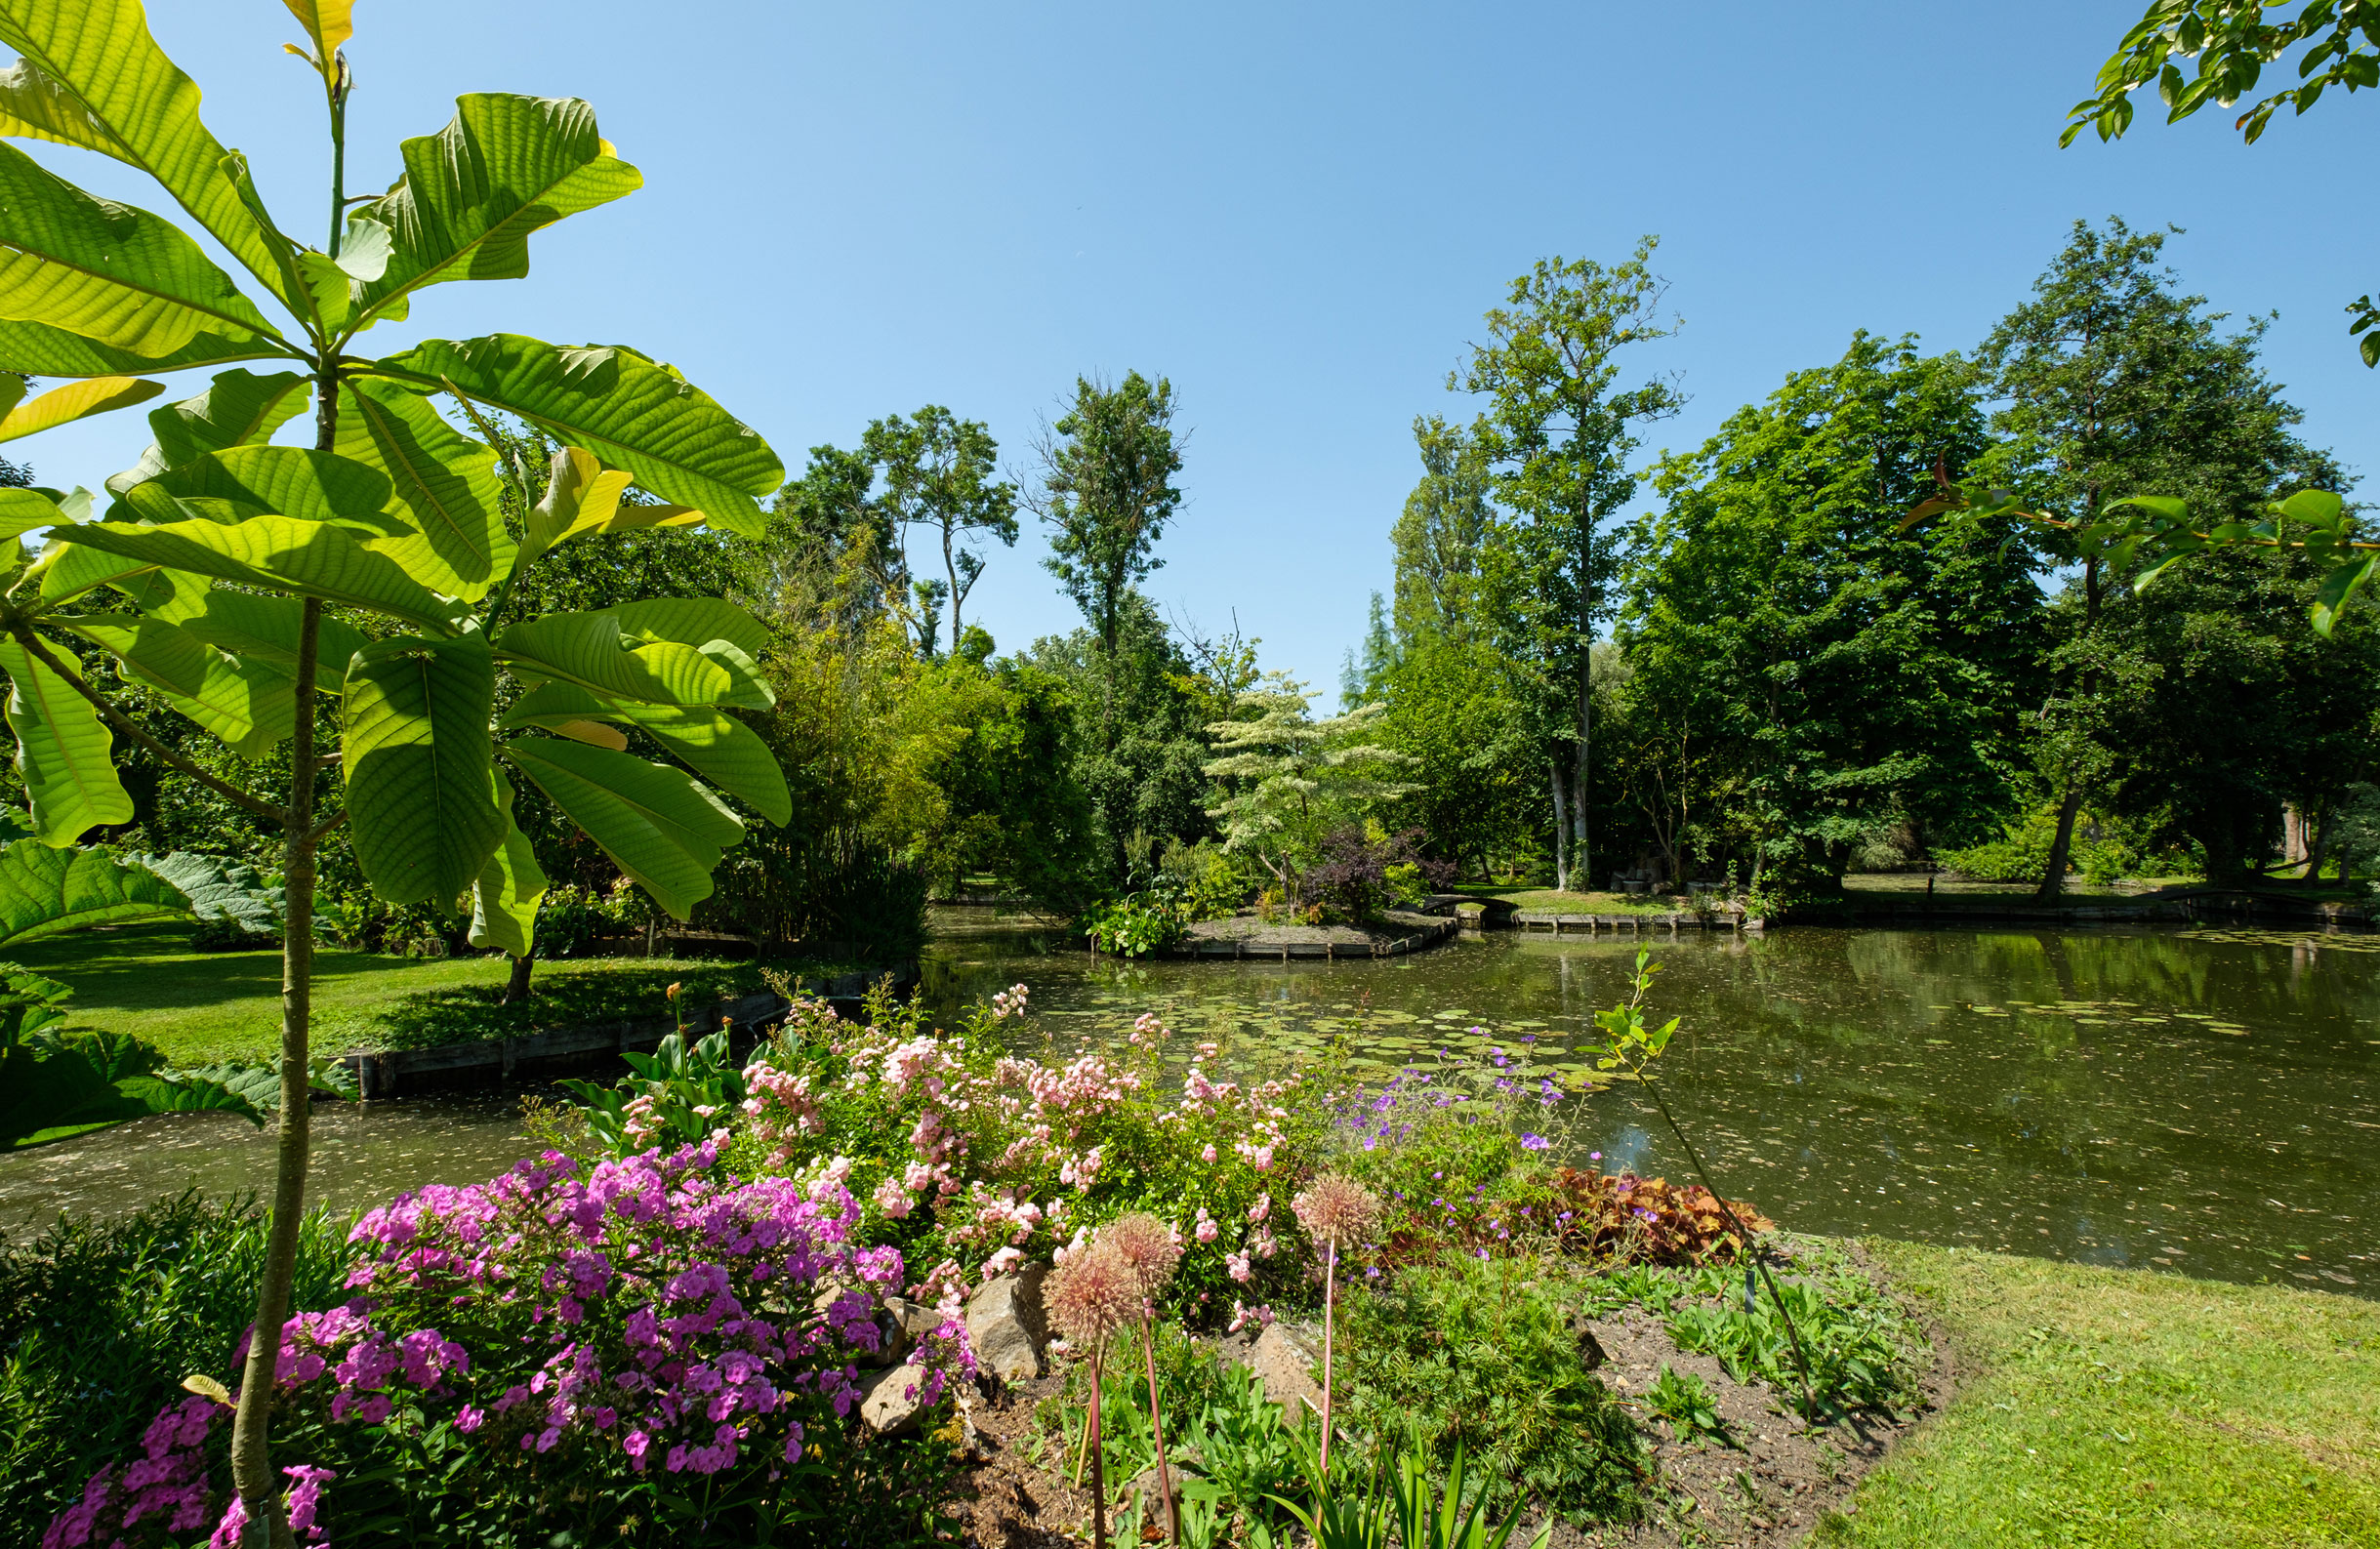 The garden surrounding your Amiens holiday cottage ‘Chés-Mouch'à-Miel’ in Amiens’ hortillonnages or floating gardens